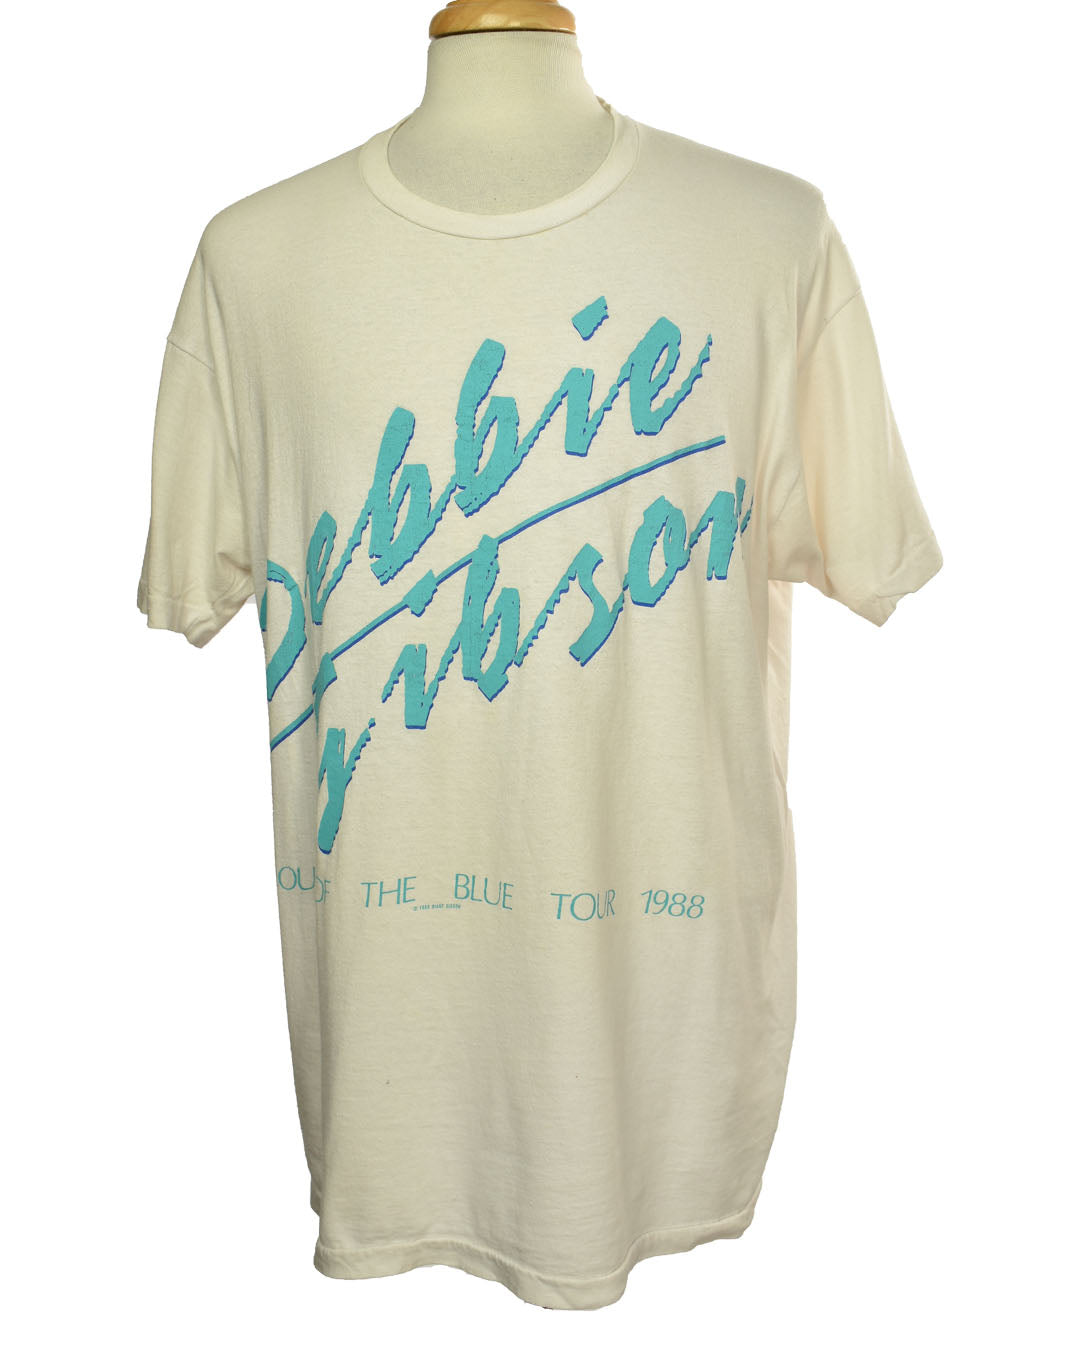 Vintage 1988 Debbie Gibson Out of the Blue Tour Tee Shirt